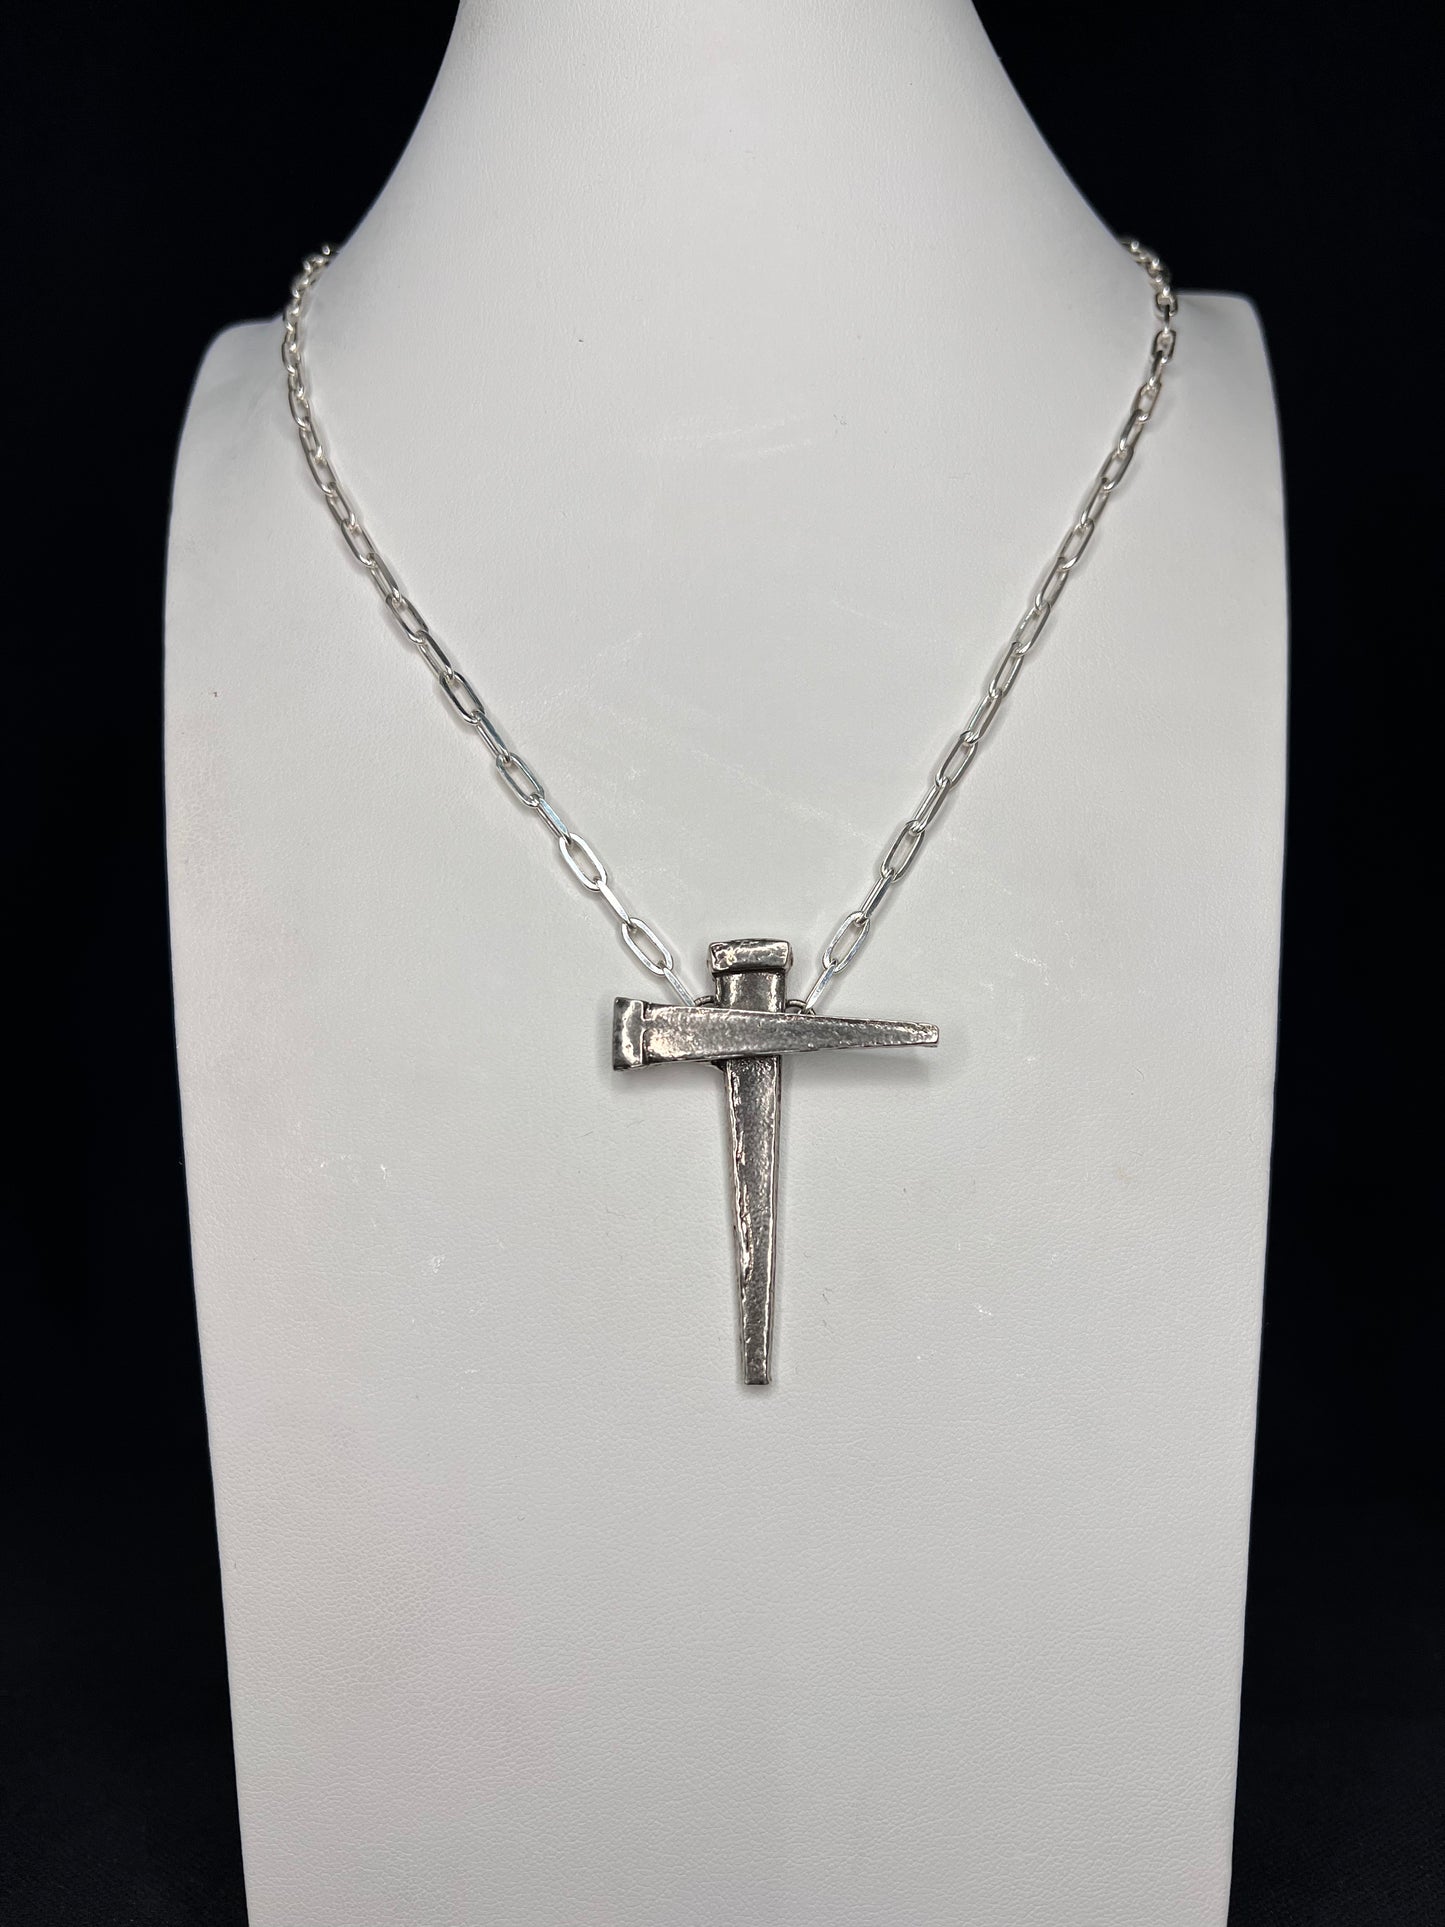 Burial Necklace